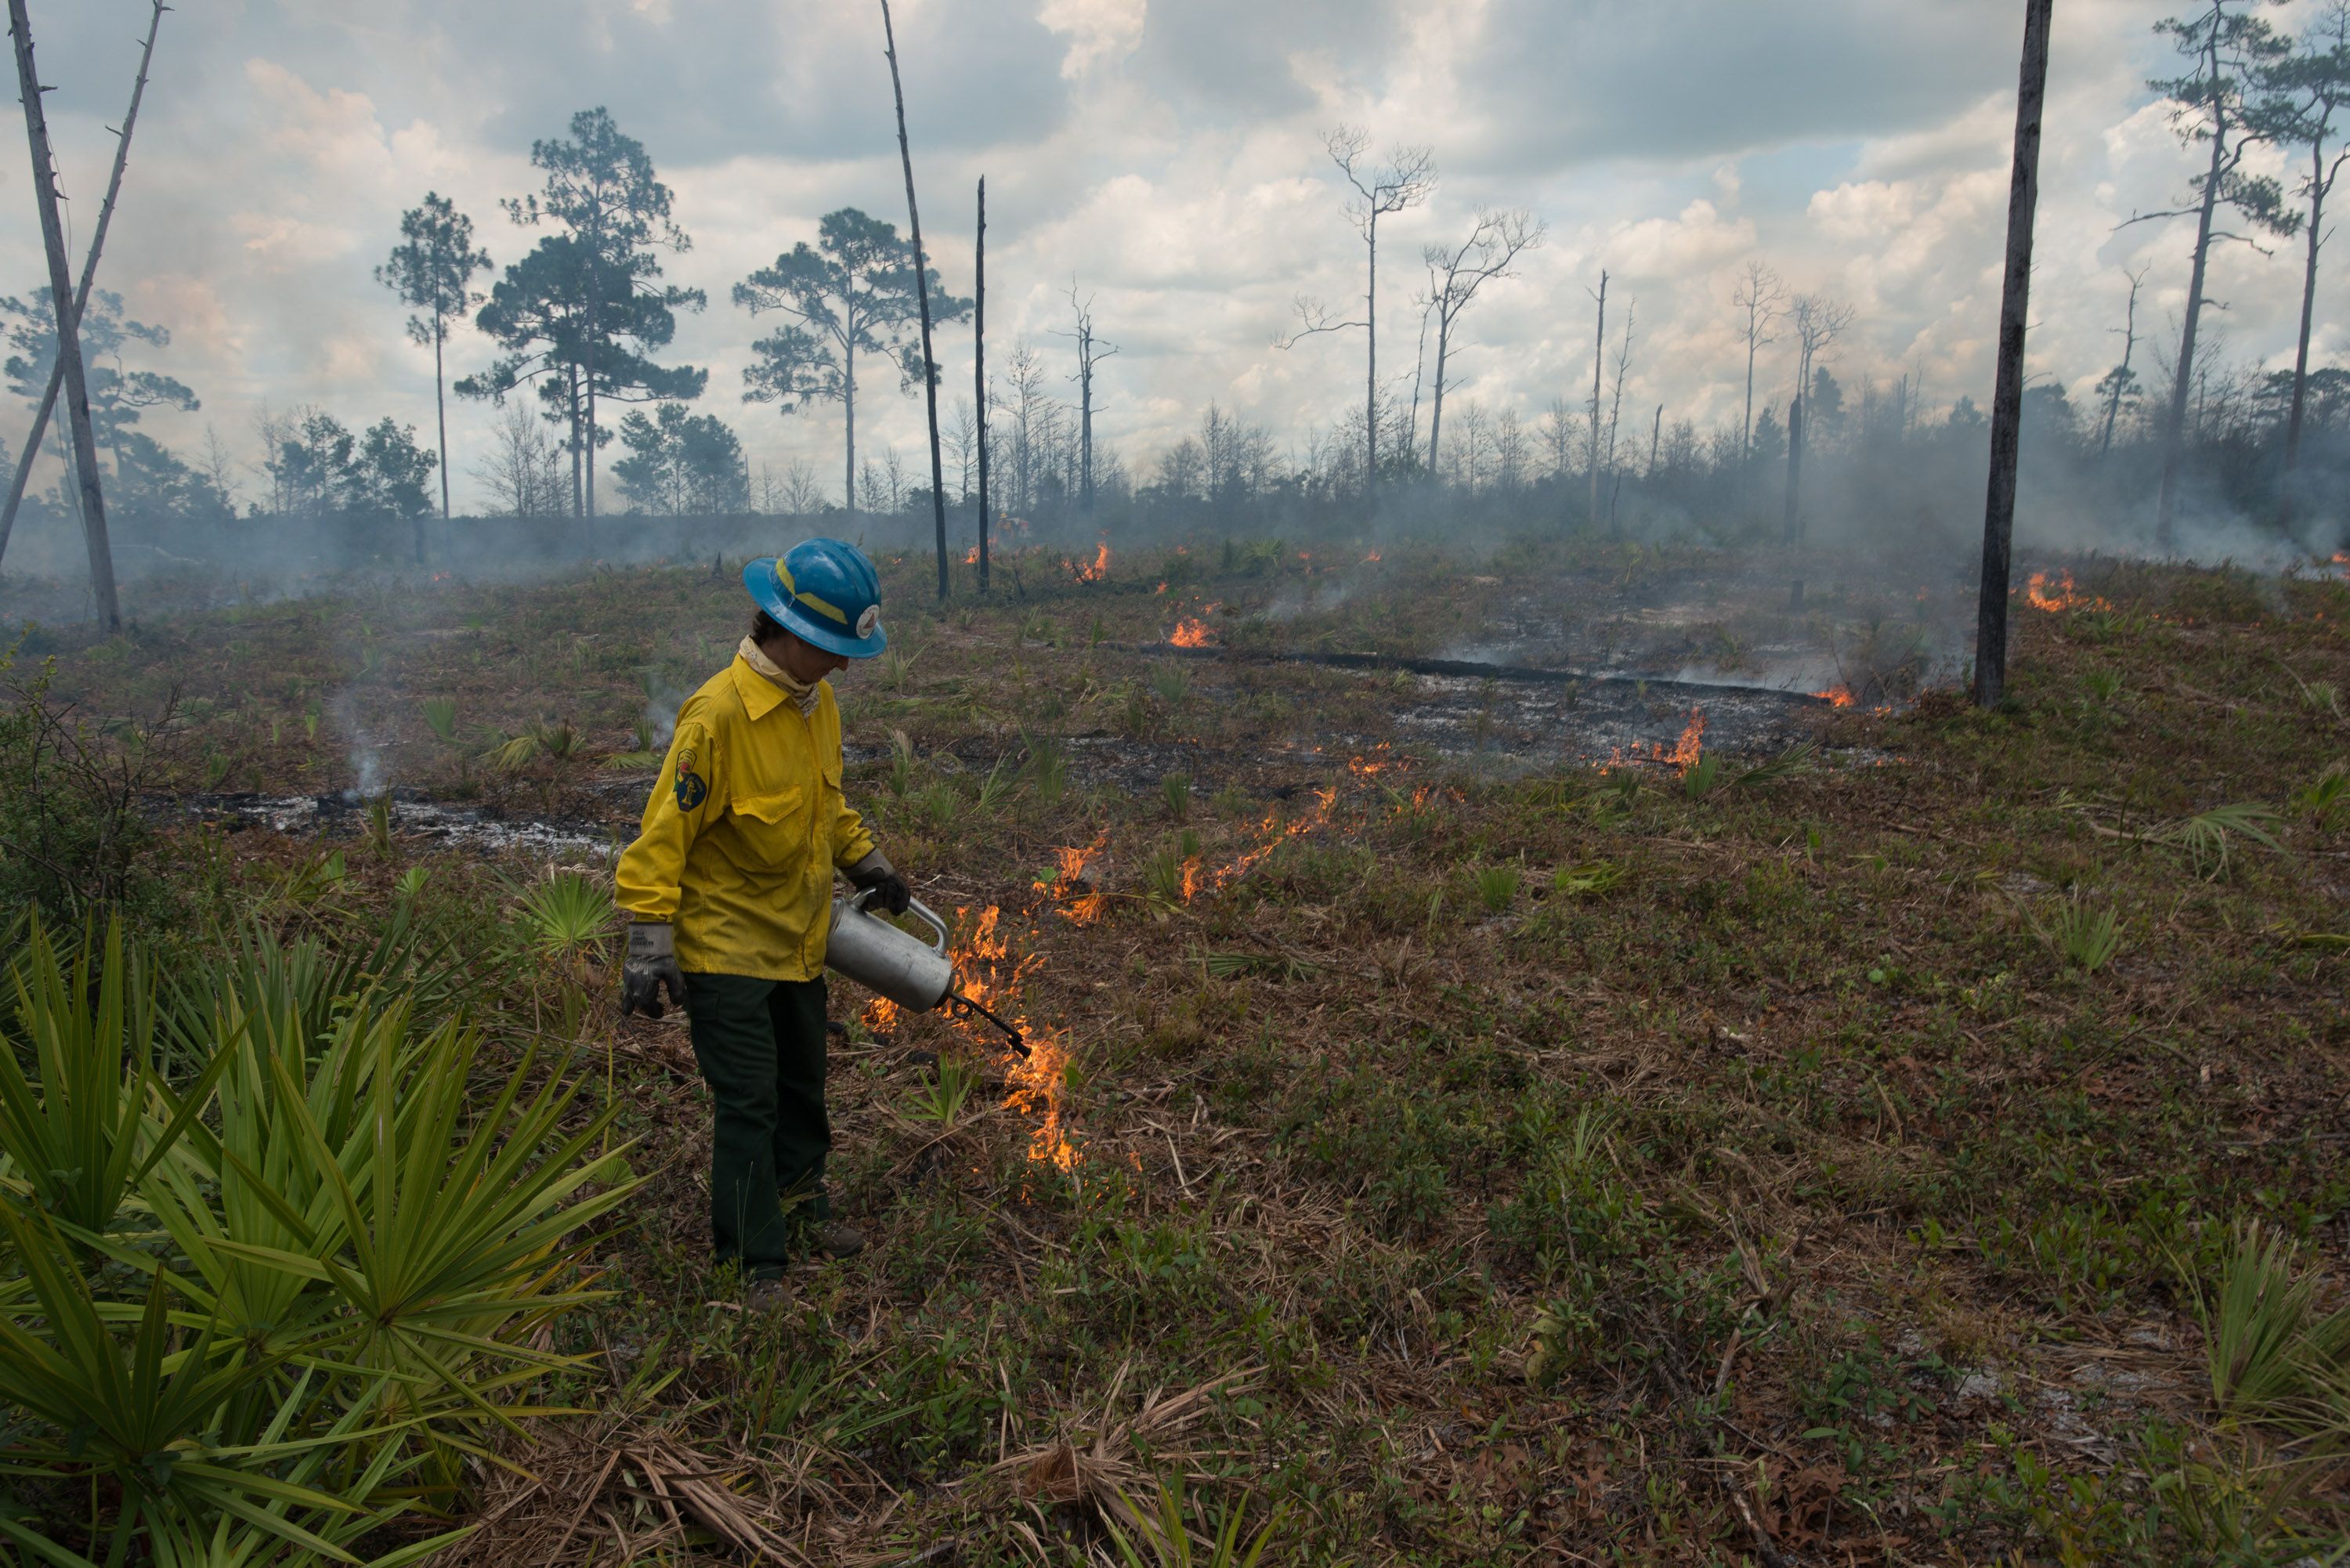 Restoration underway on the Red Hill: an Archbold intern lights a strip fire following extensive mechanical mowing to remove long-unburned shrub understory. Sandhill groundcover will rapidly re-sprout within days to weeks. Credit, Carlton Ward.